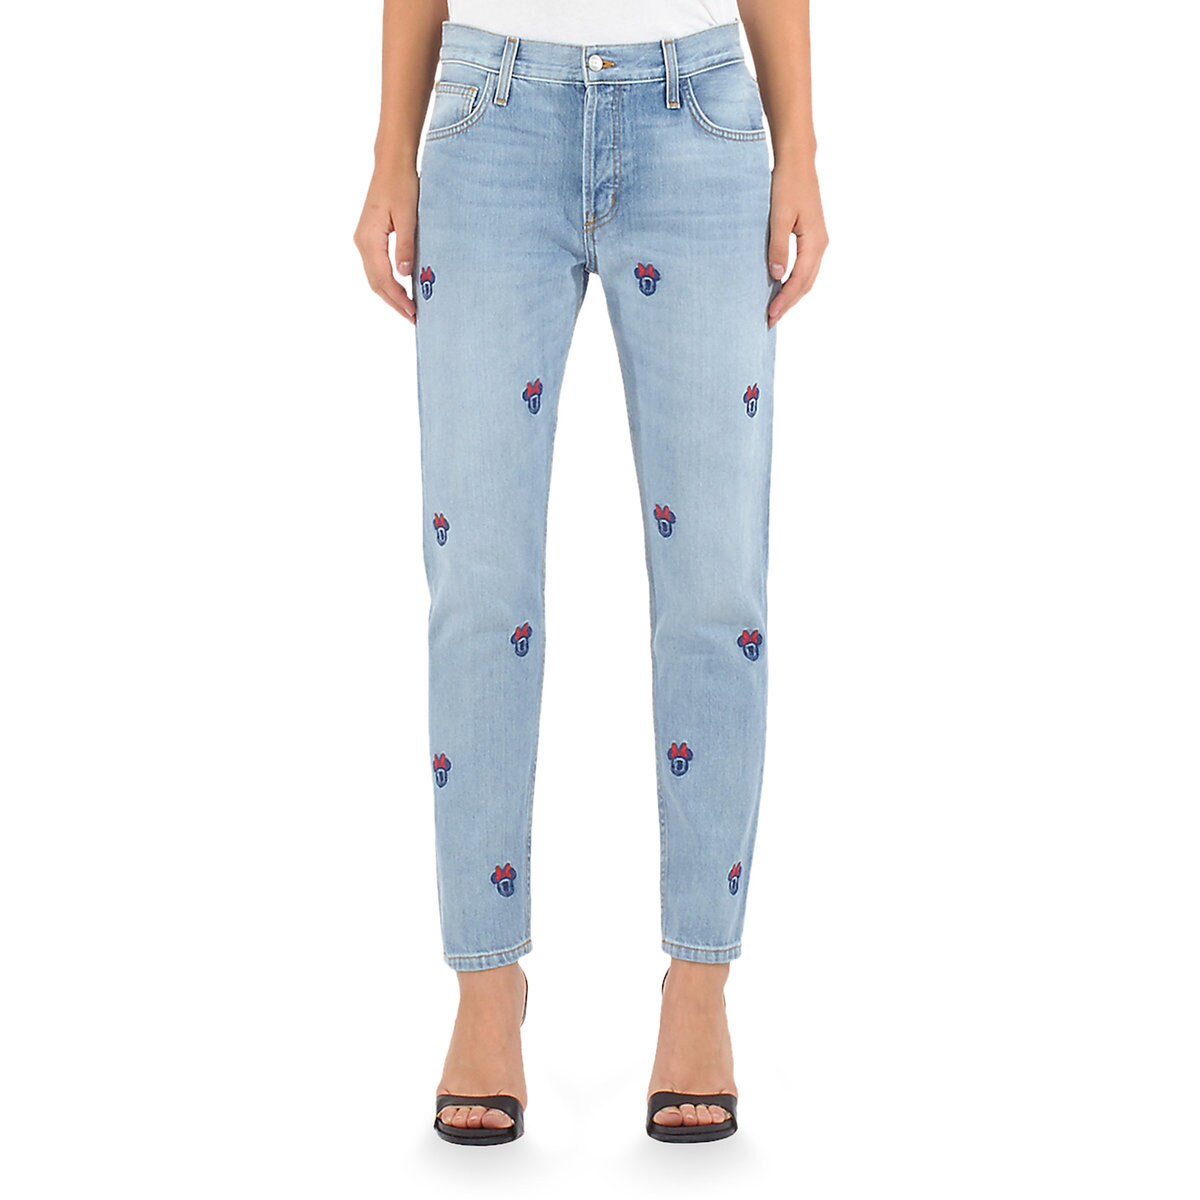 Minnie Mouse Embroidered Boyfriend Jeans by SIWY